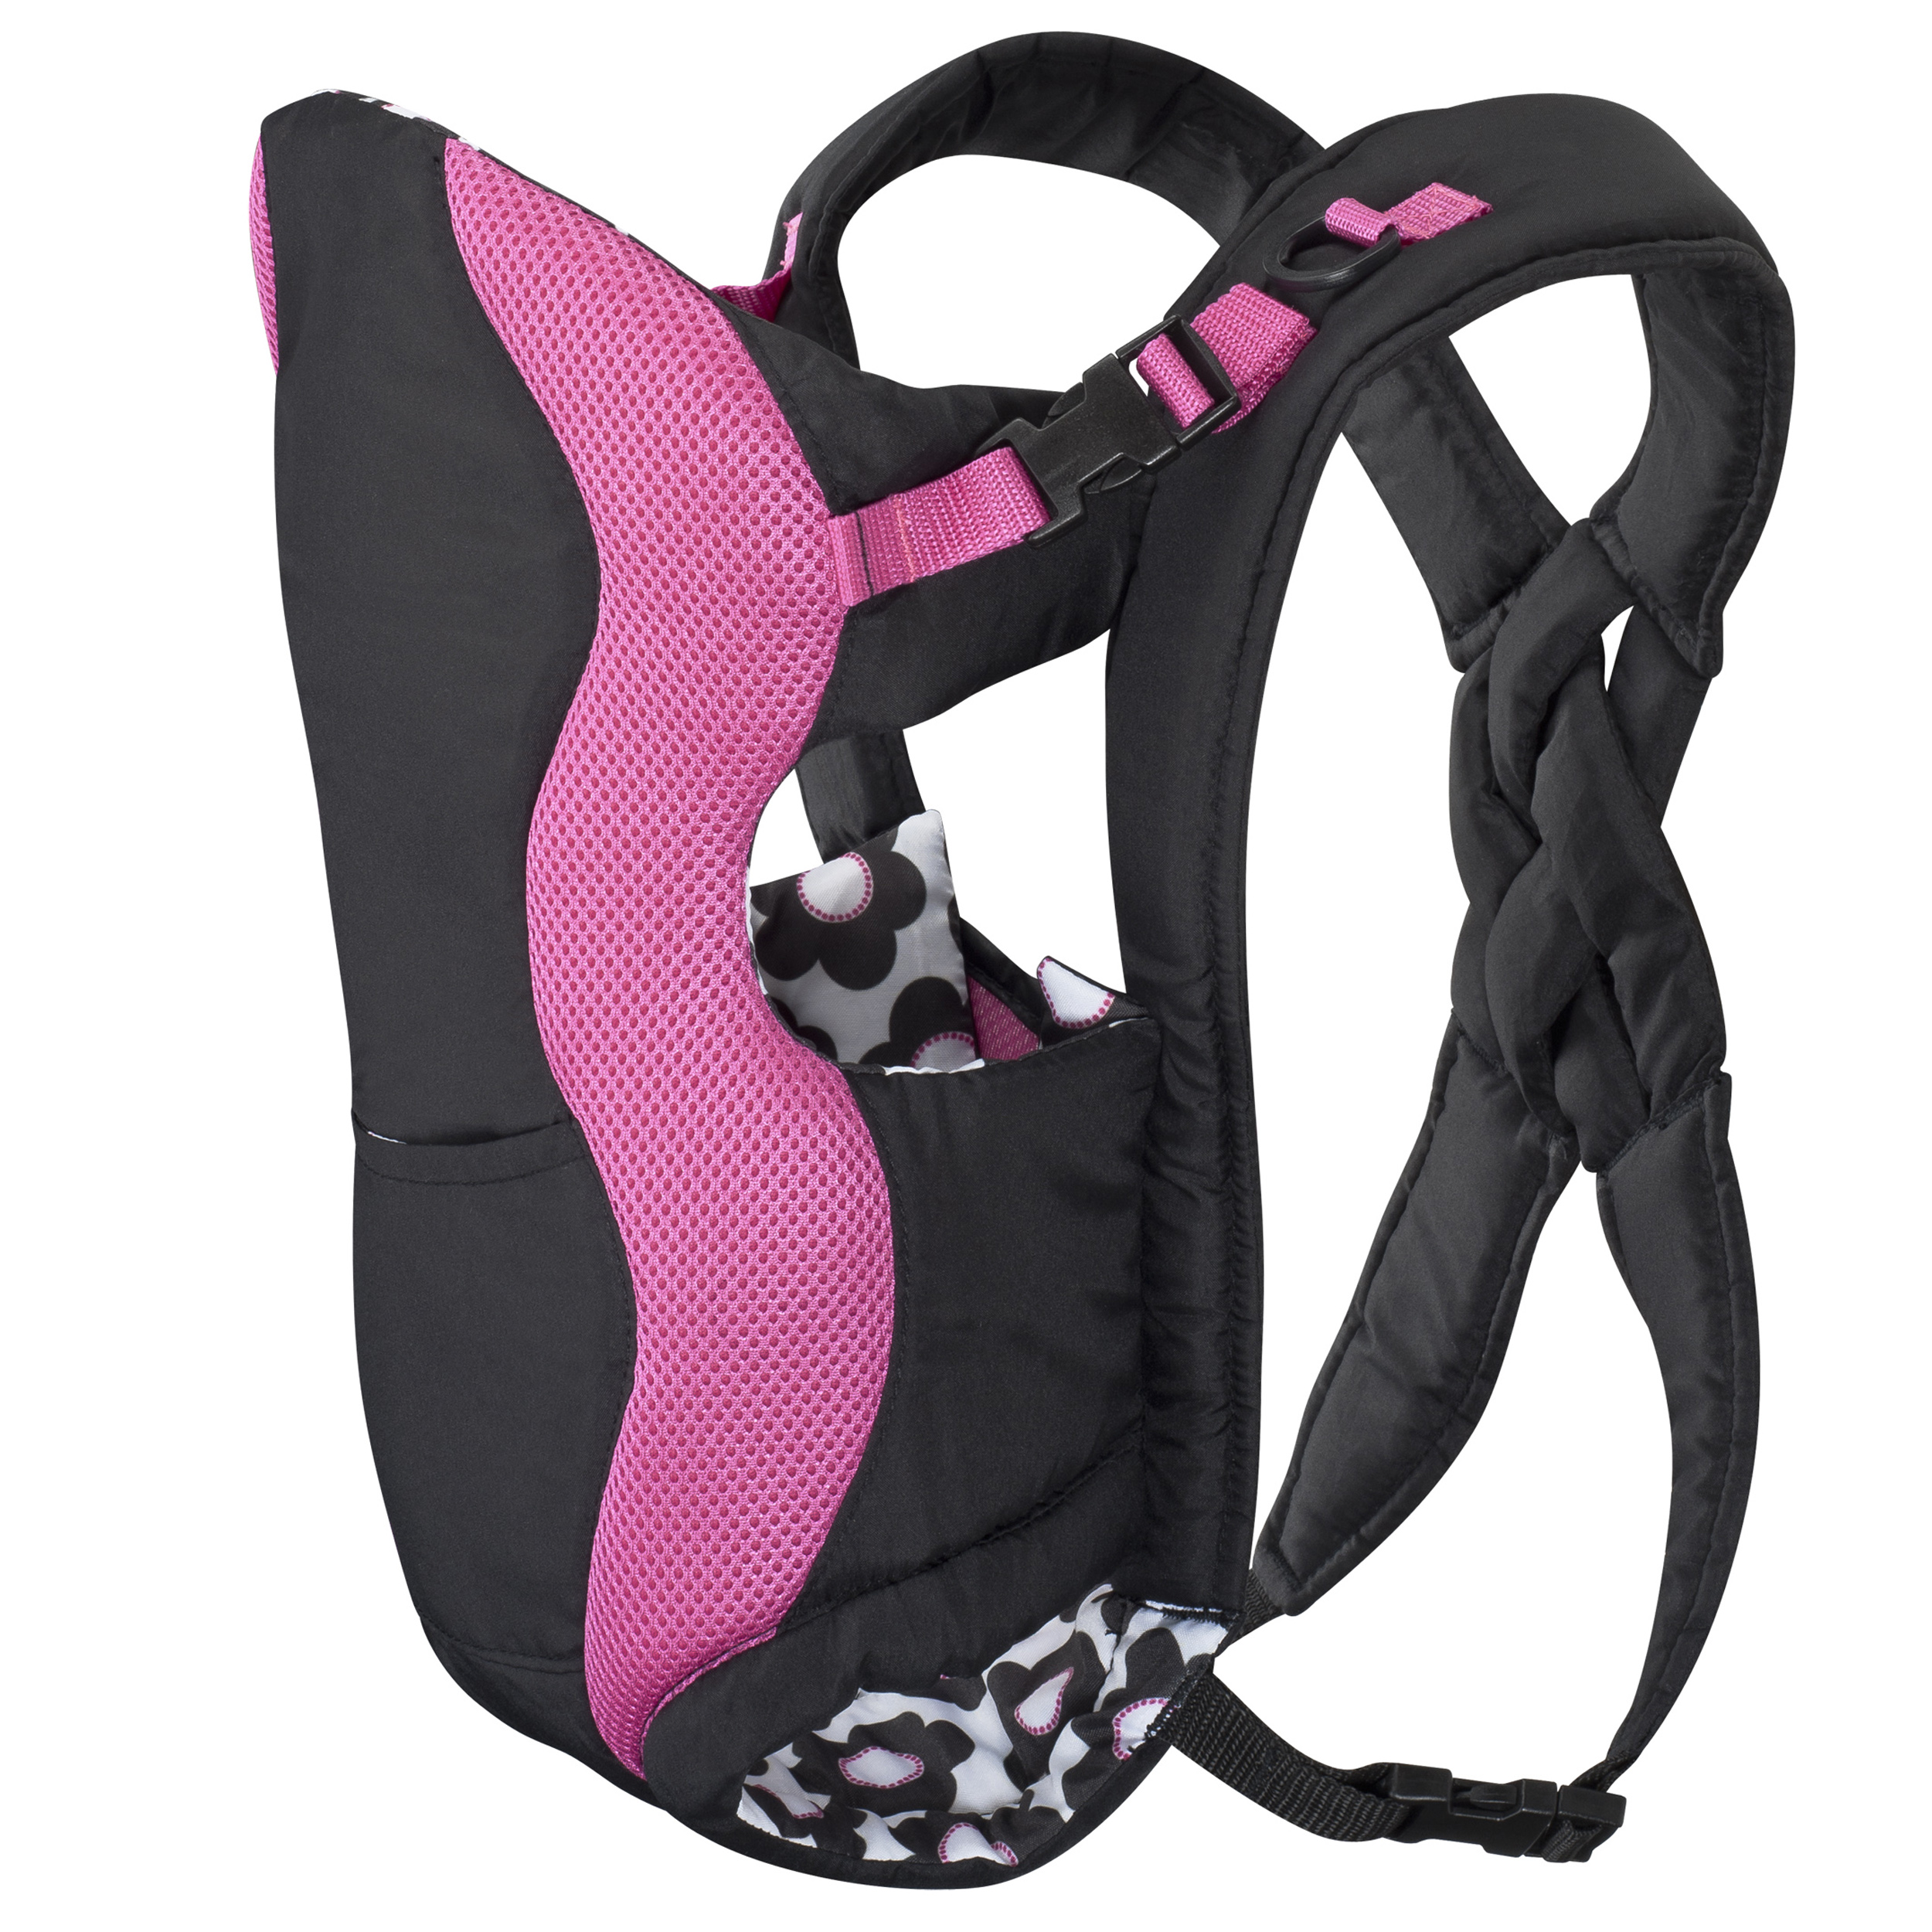 Breathable Infant Carrier (Marianna Pink) - image 1 of 7